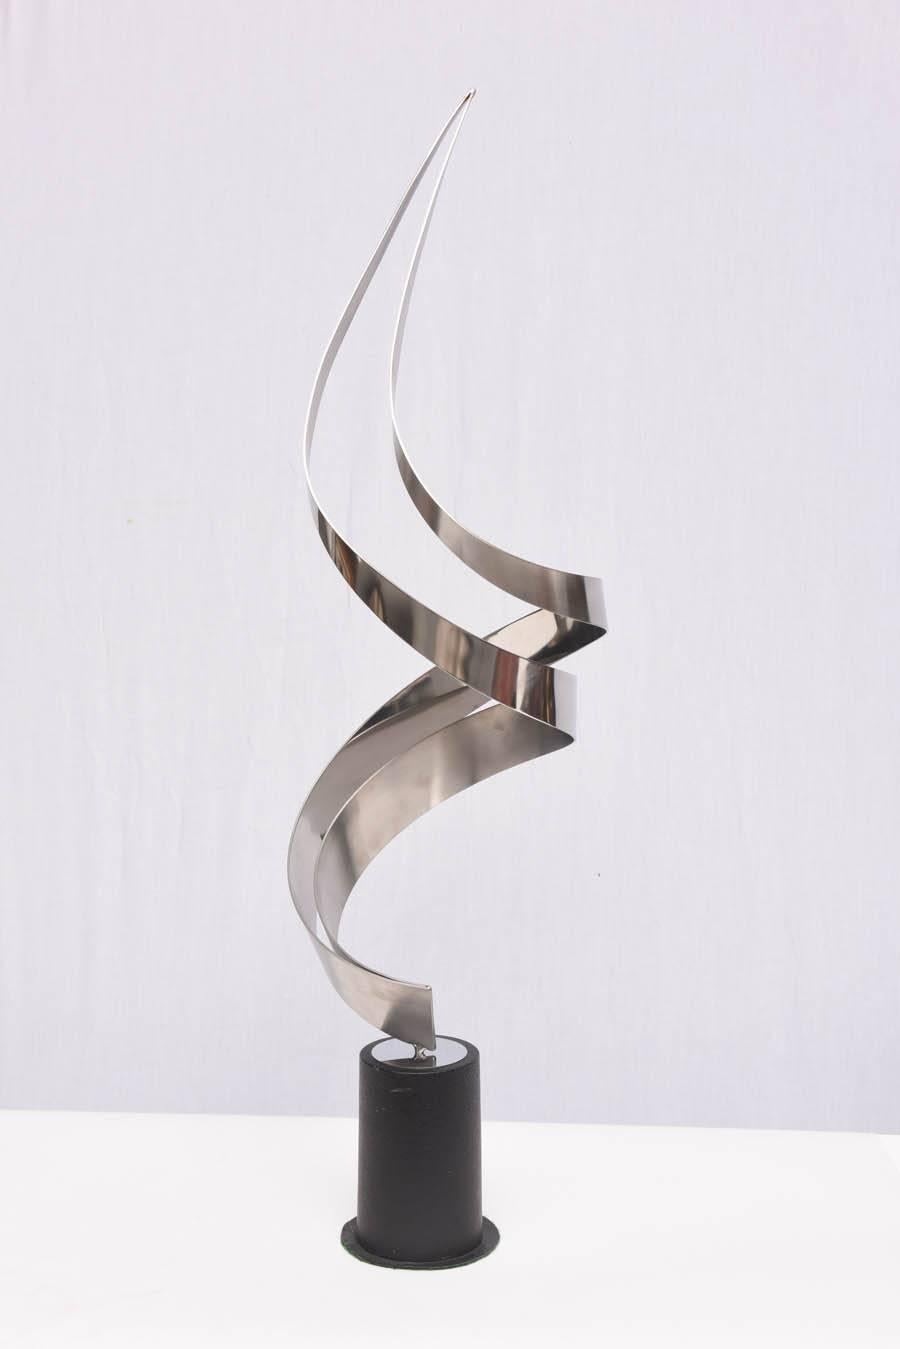 Curtis Jere Swivel Swirl Sculpture in Chrome, 1970s, USA For Sale 2